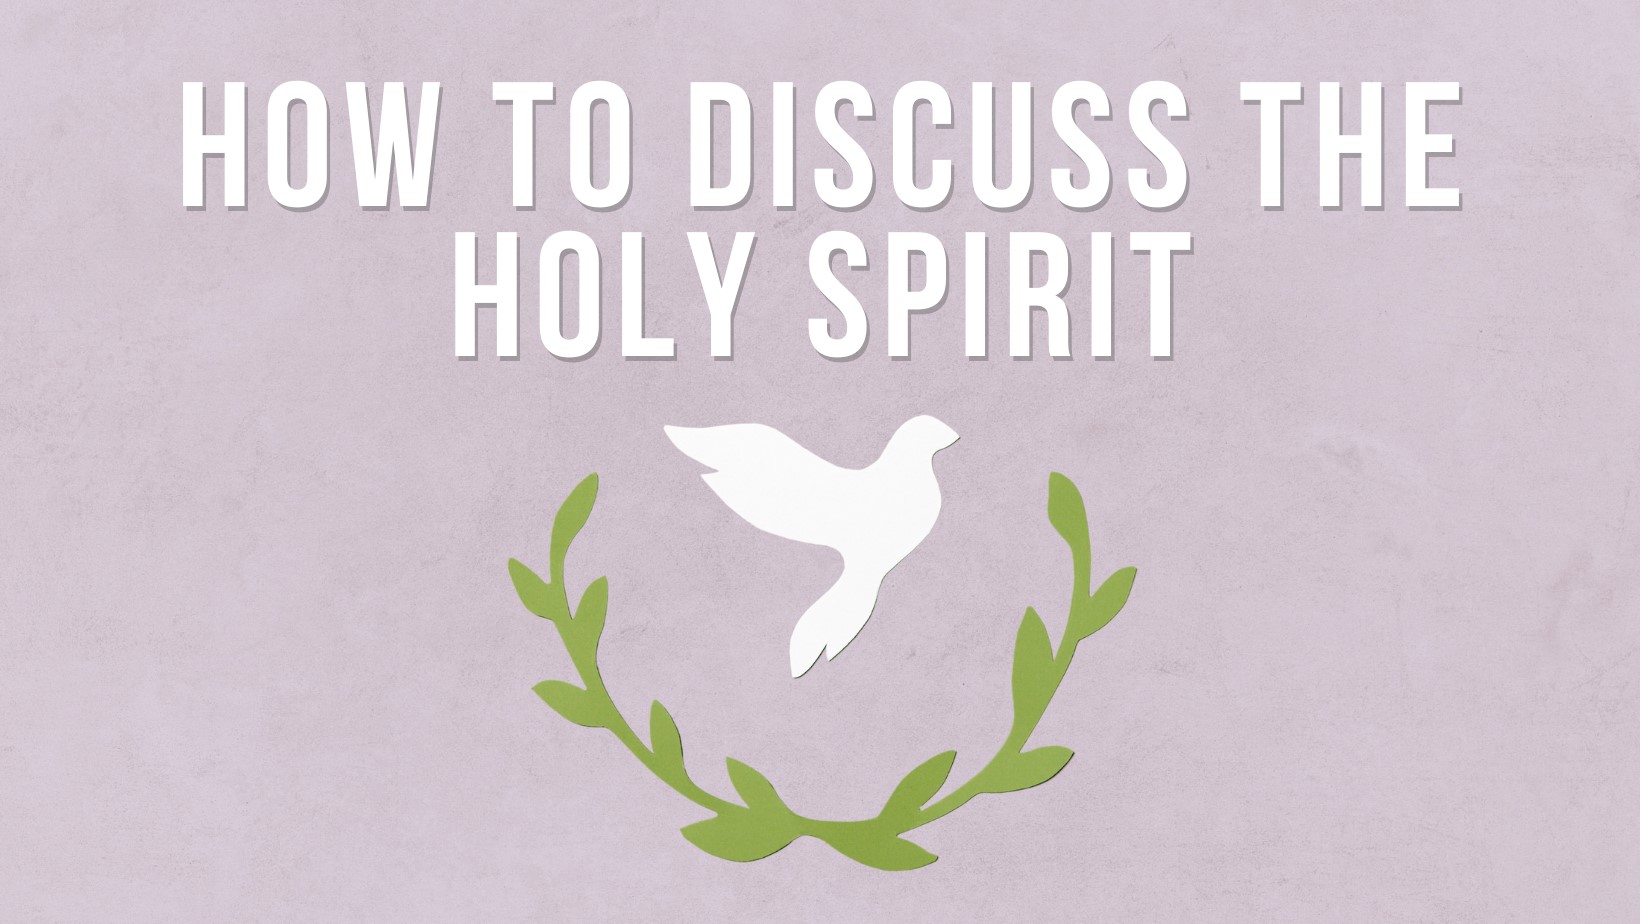 How to discuss the Holy Spirit